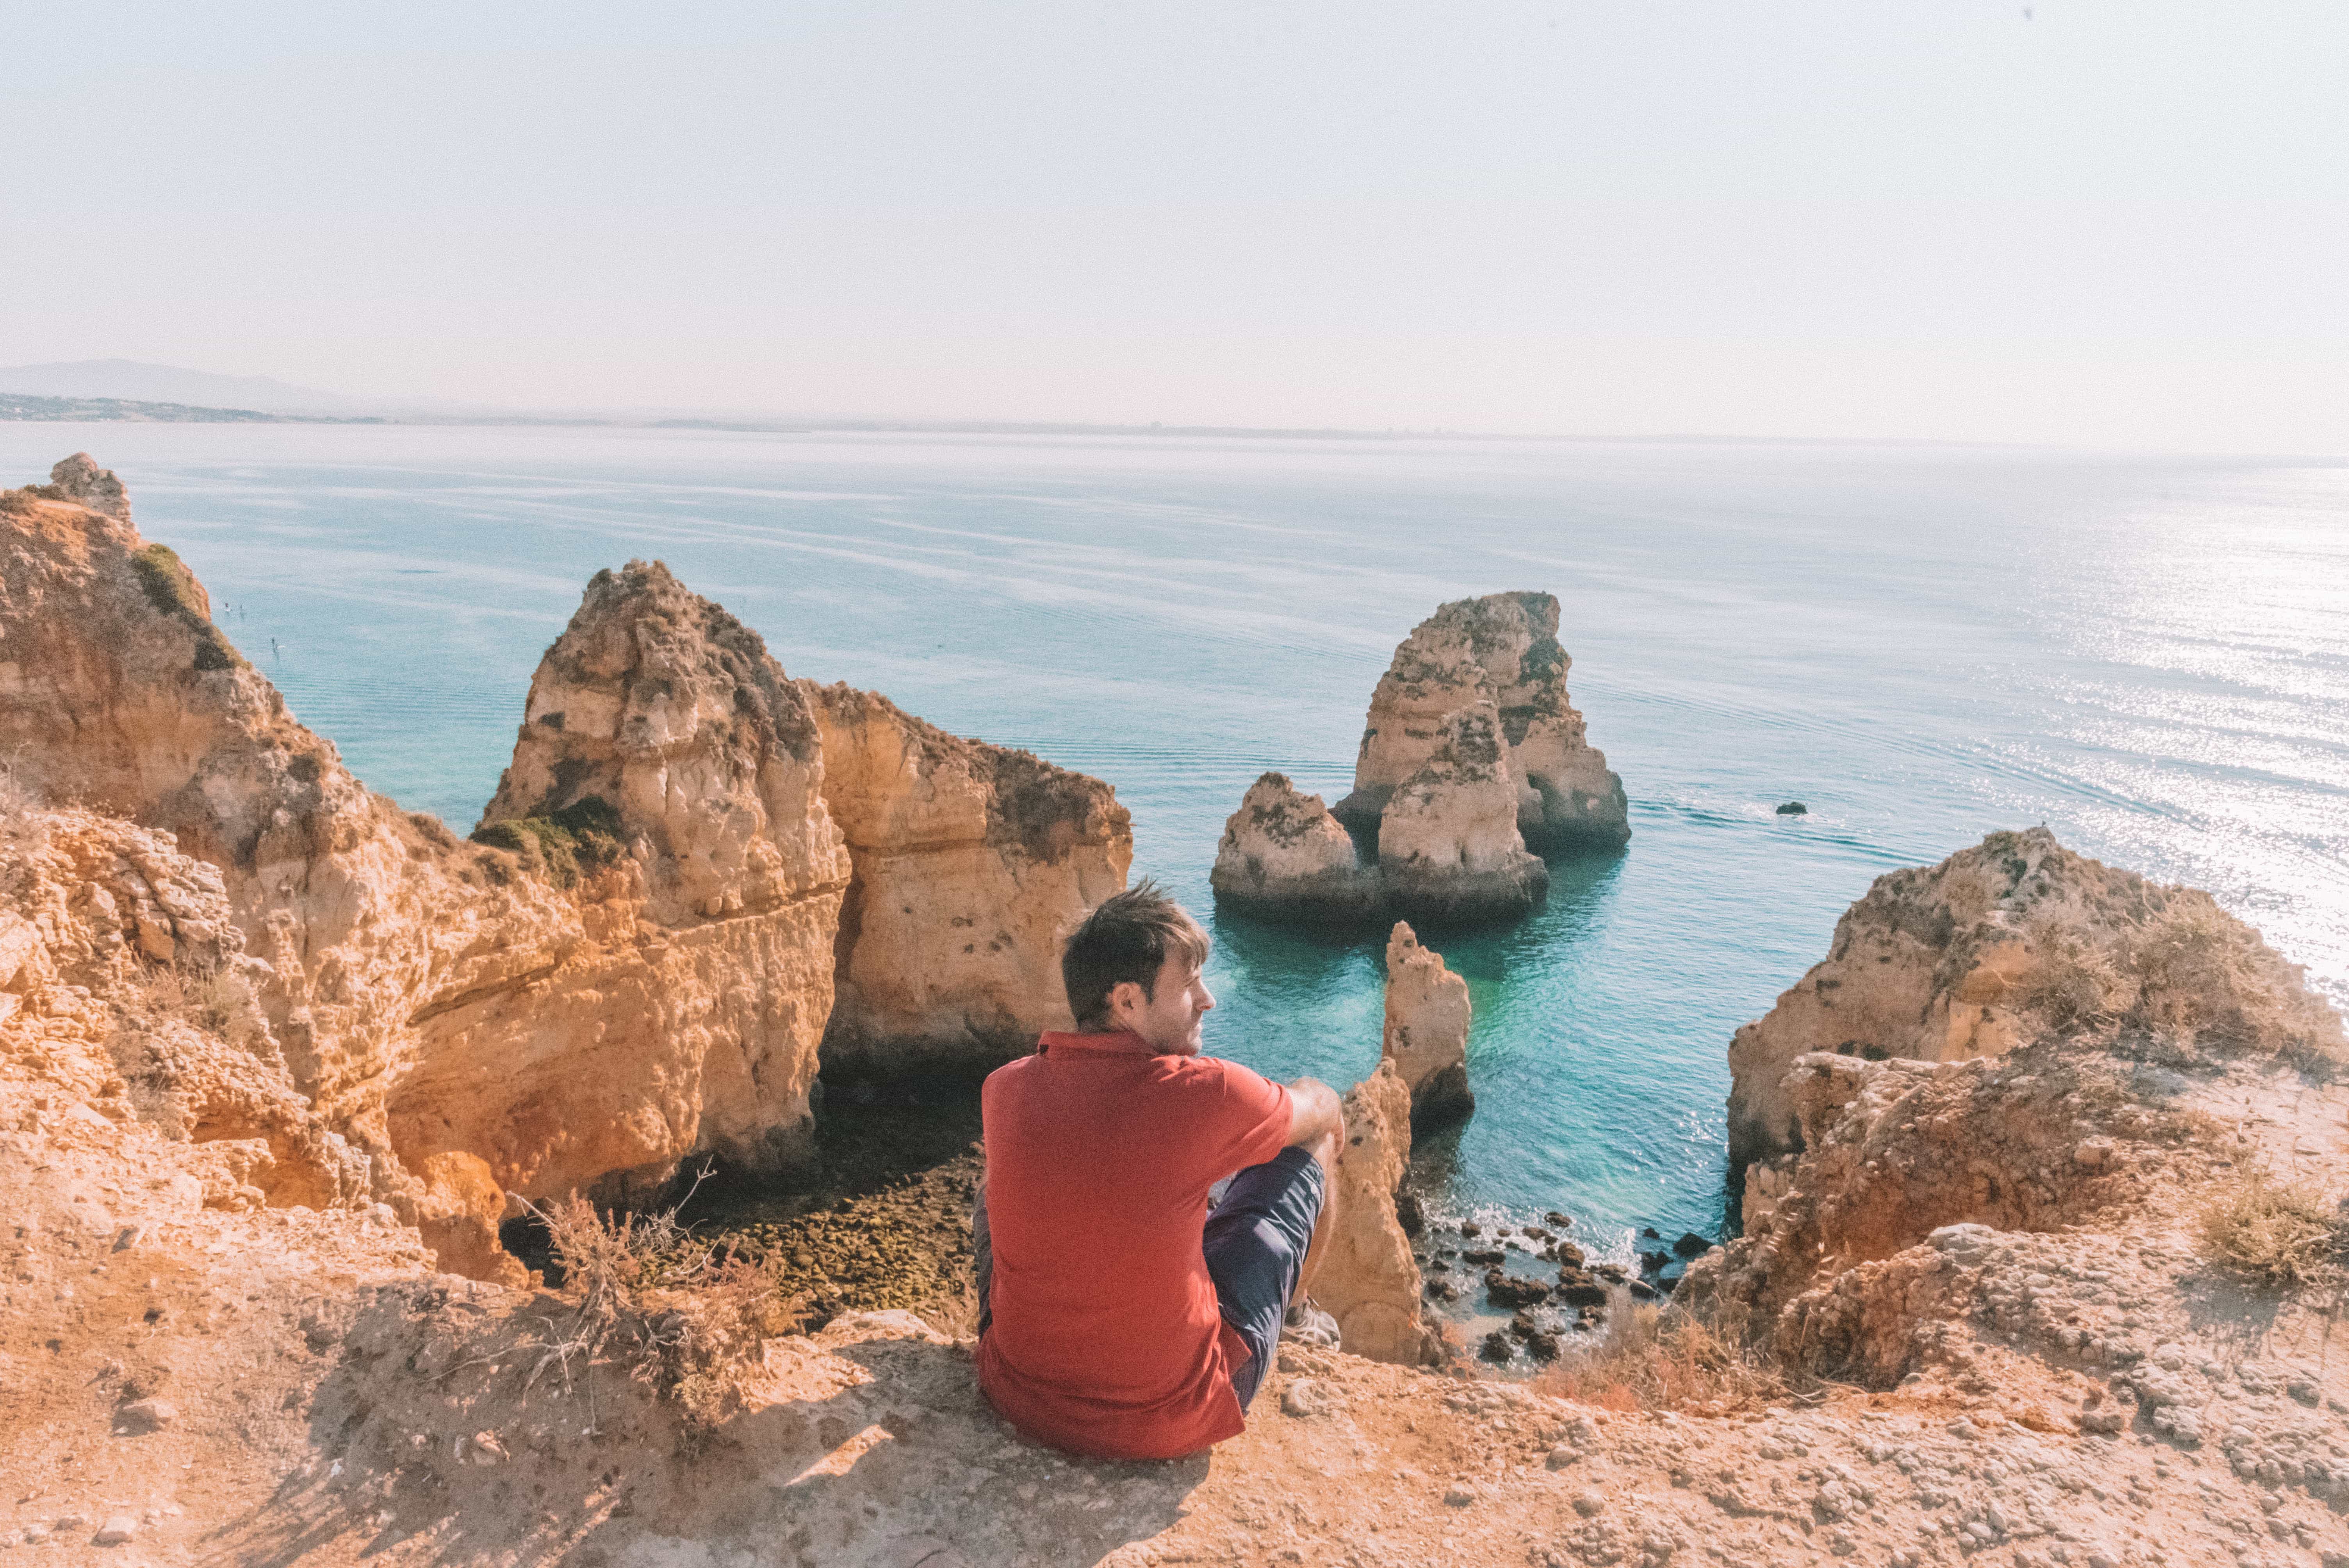 things to do in Algarve, places to visit in Algarve, festivals in Algarve, best time to visit Algarve, daily budget in Algarve, food to try in Algarve, how to get to Algarve, road trip Algarve, beaches to visit in algarve